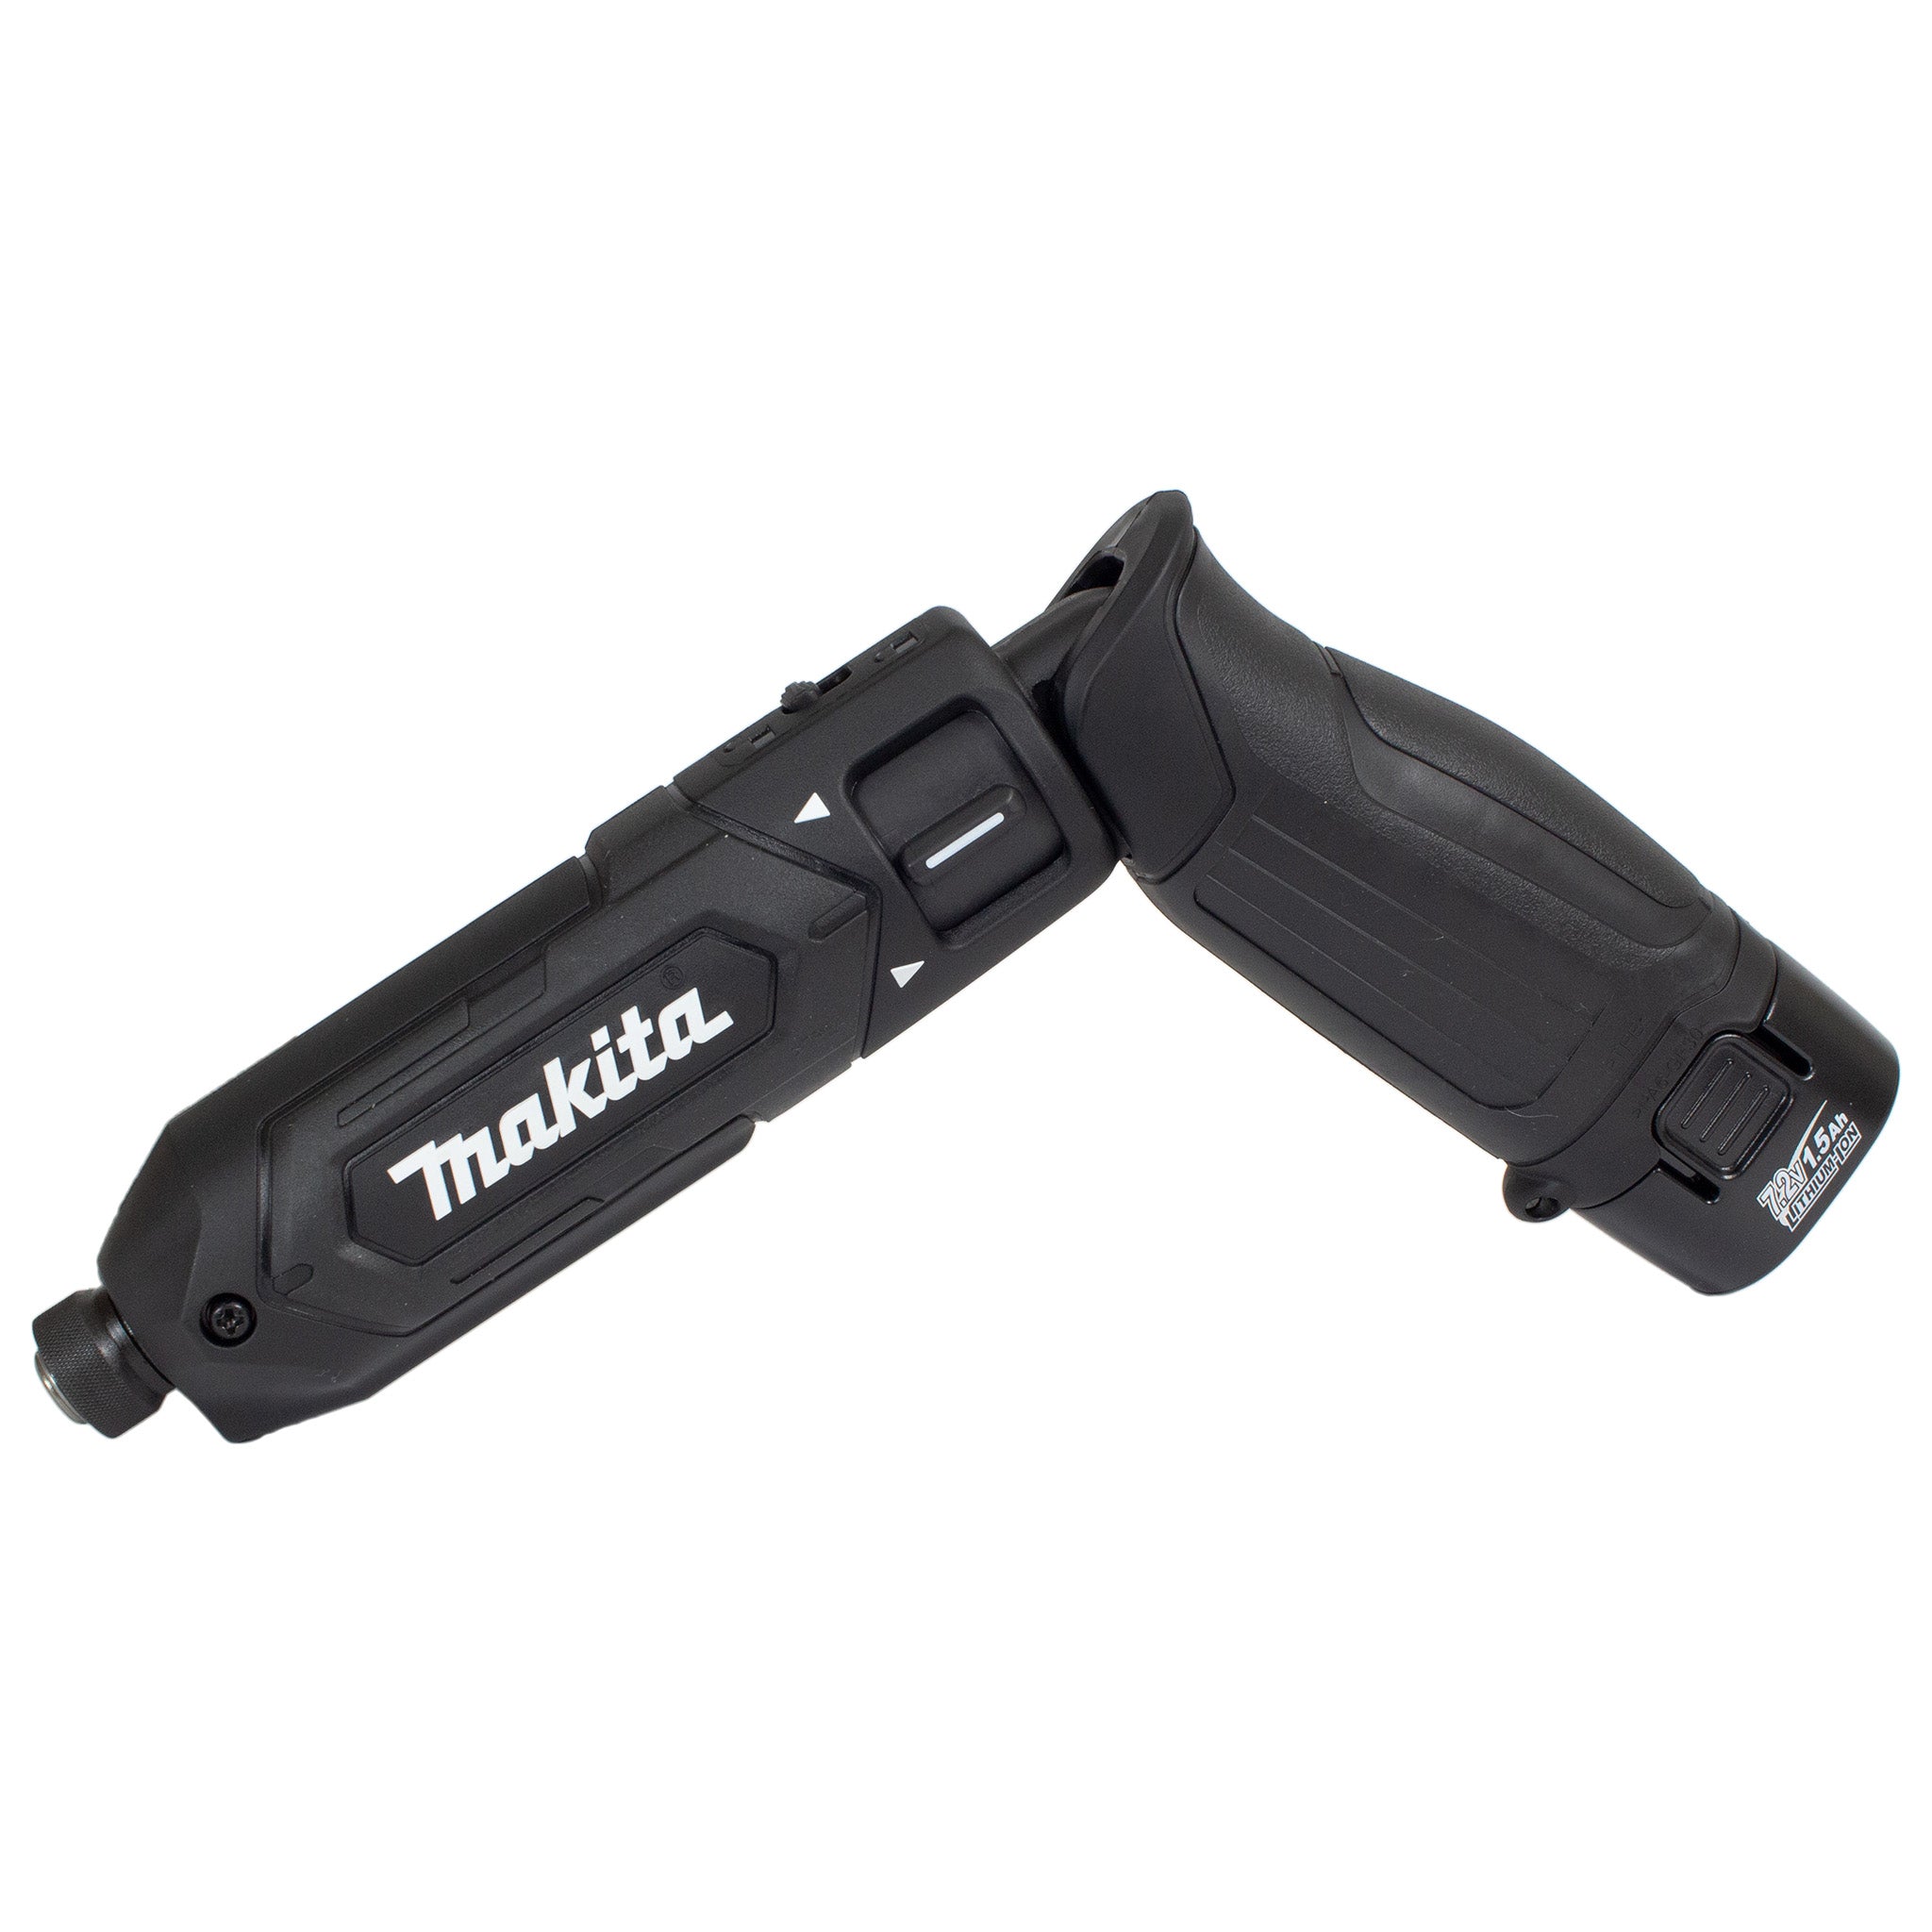 Makita 7.2V rechargeable pen impact driver TD022DSHX (with battery